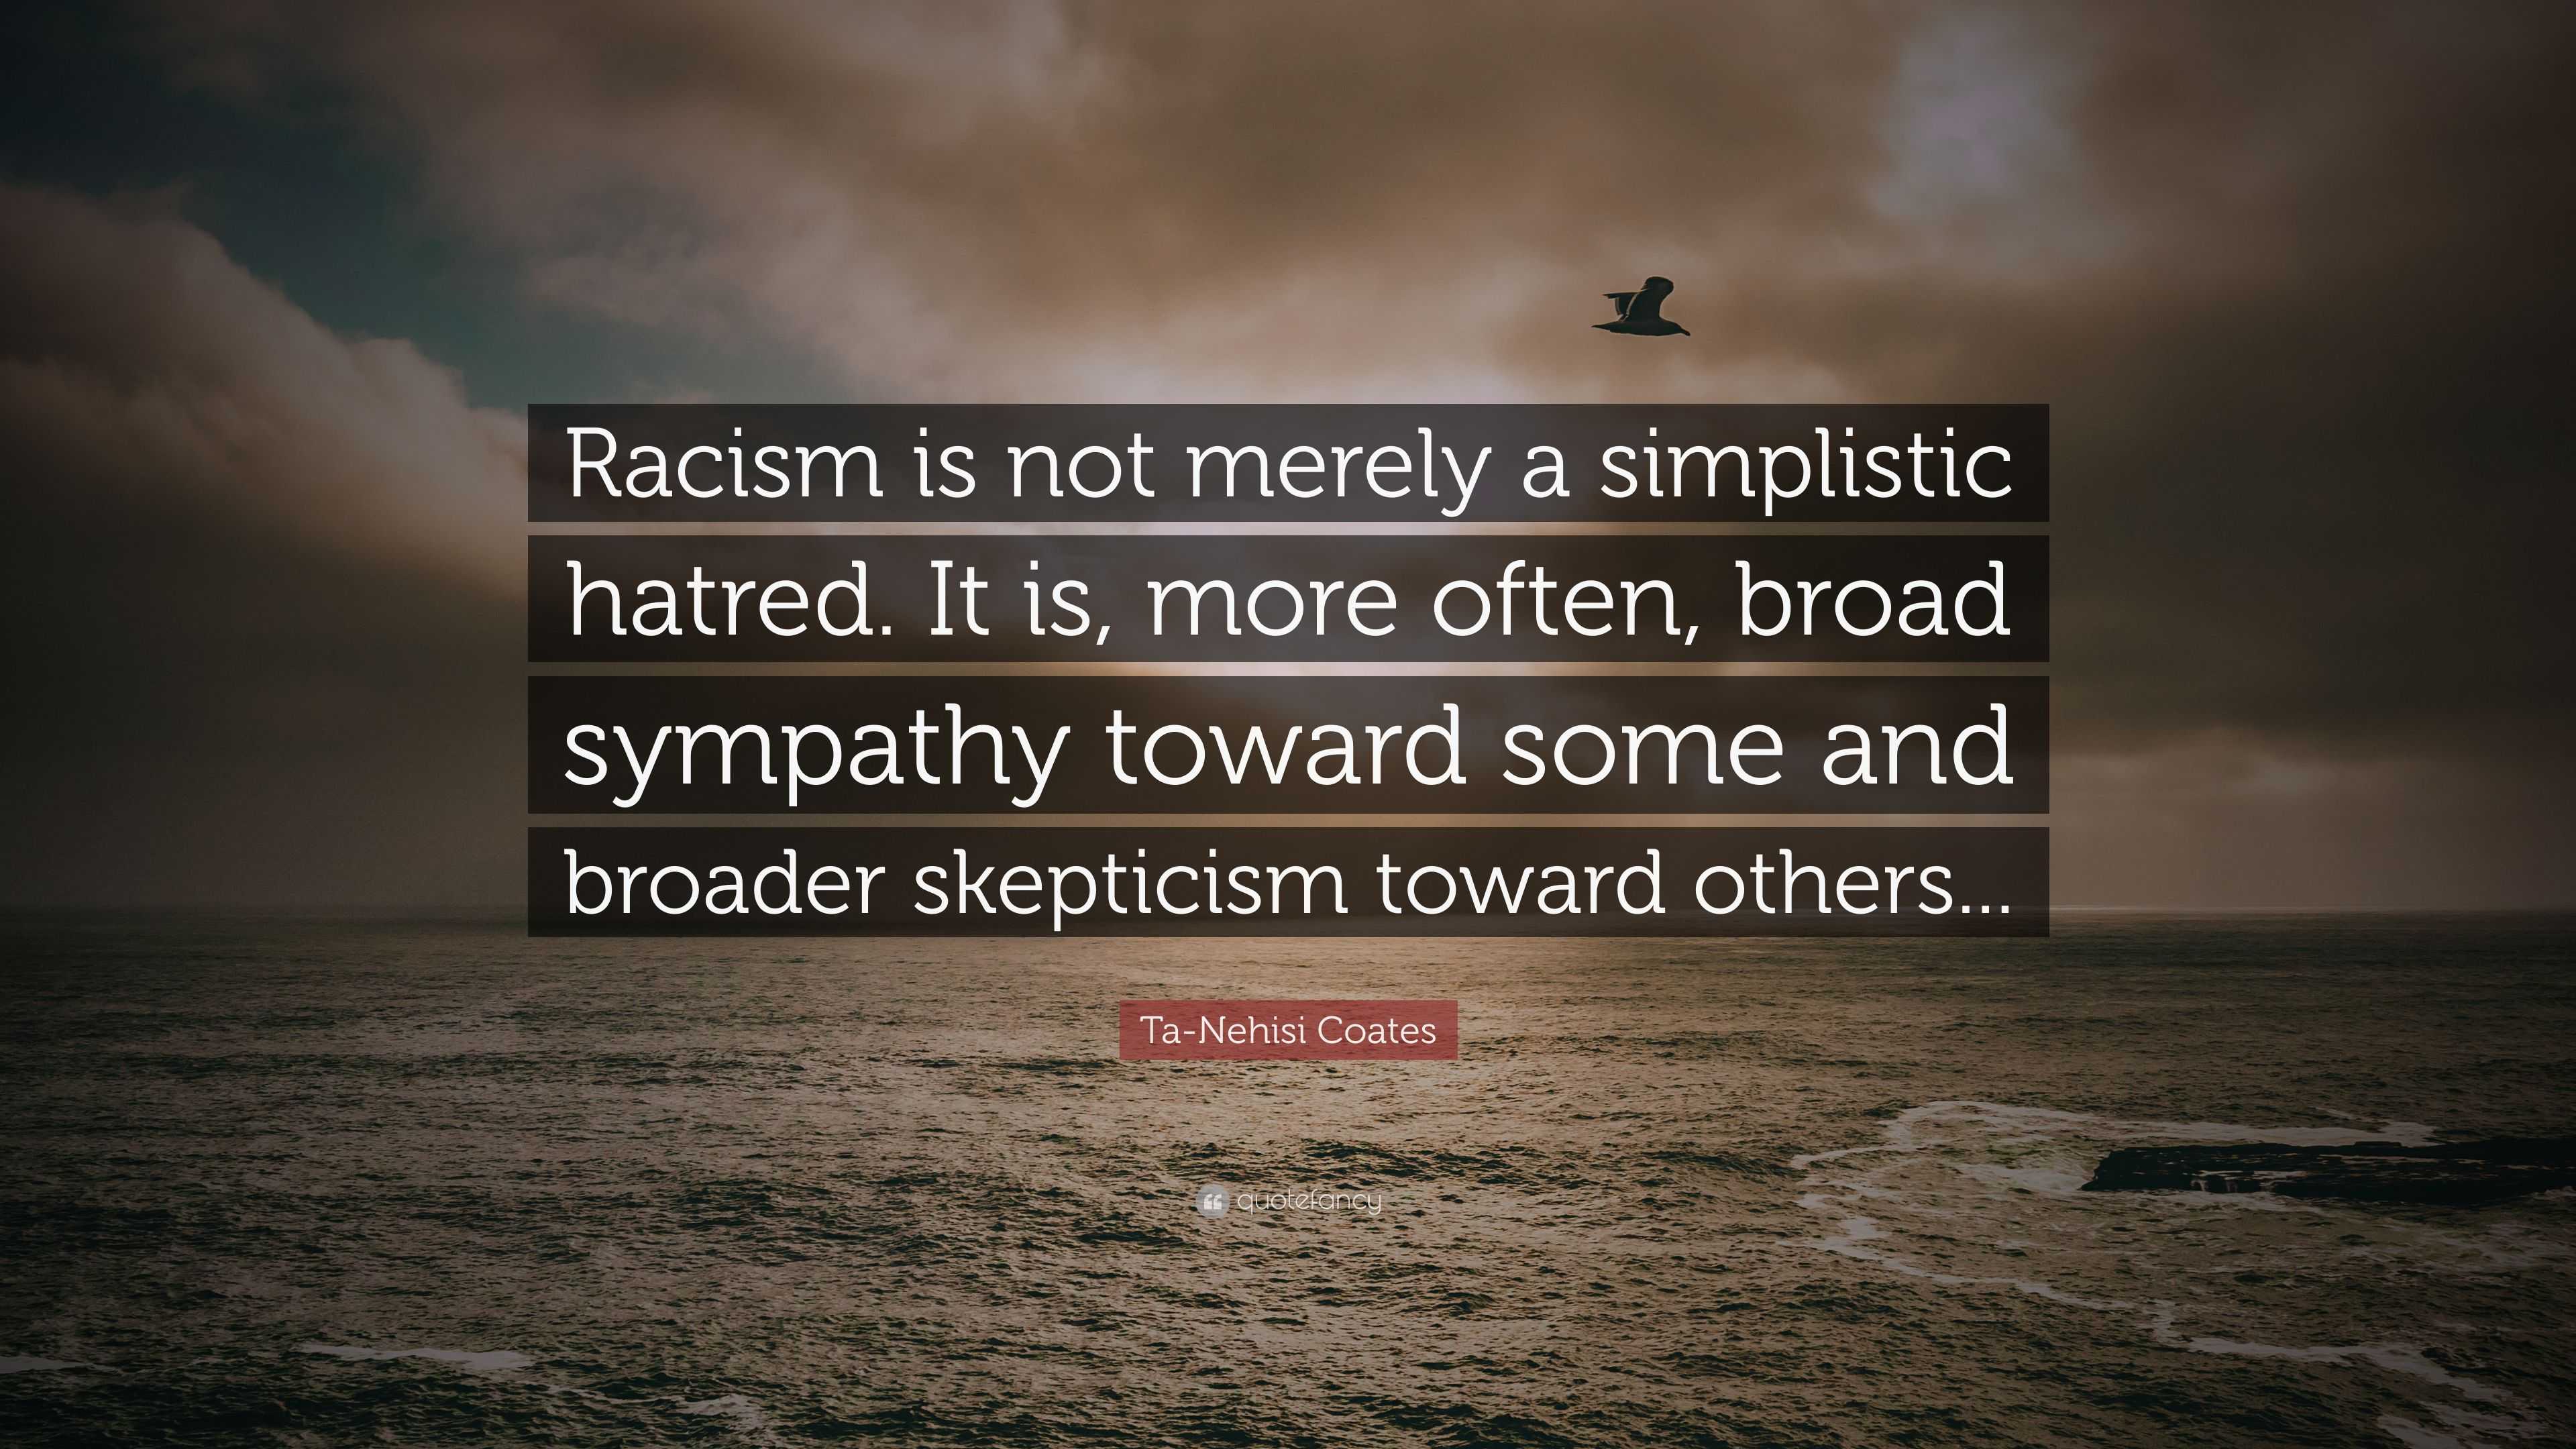 Ta-Nehisi Coates Quote: “Racism is not merely a simplistic hatred. It ...